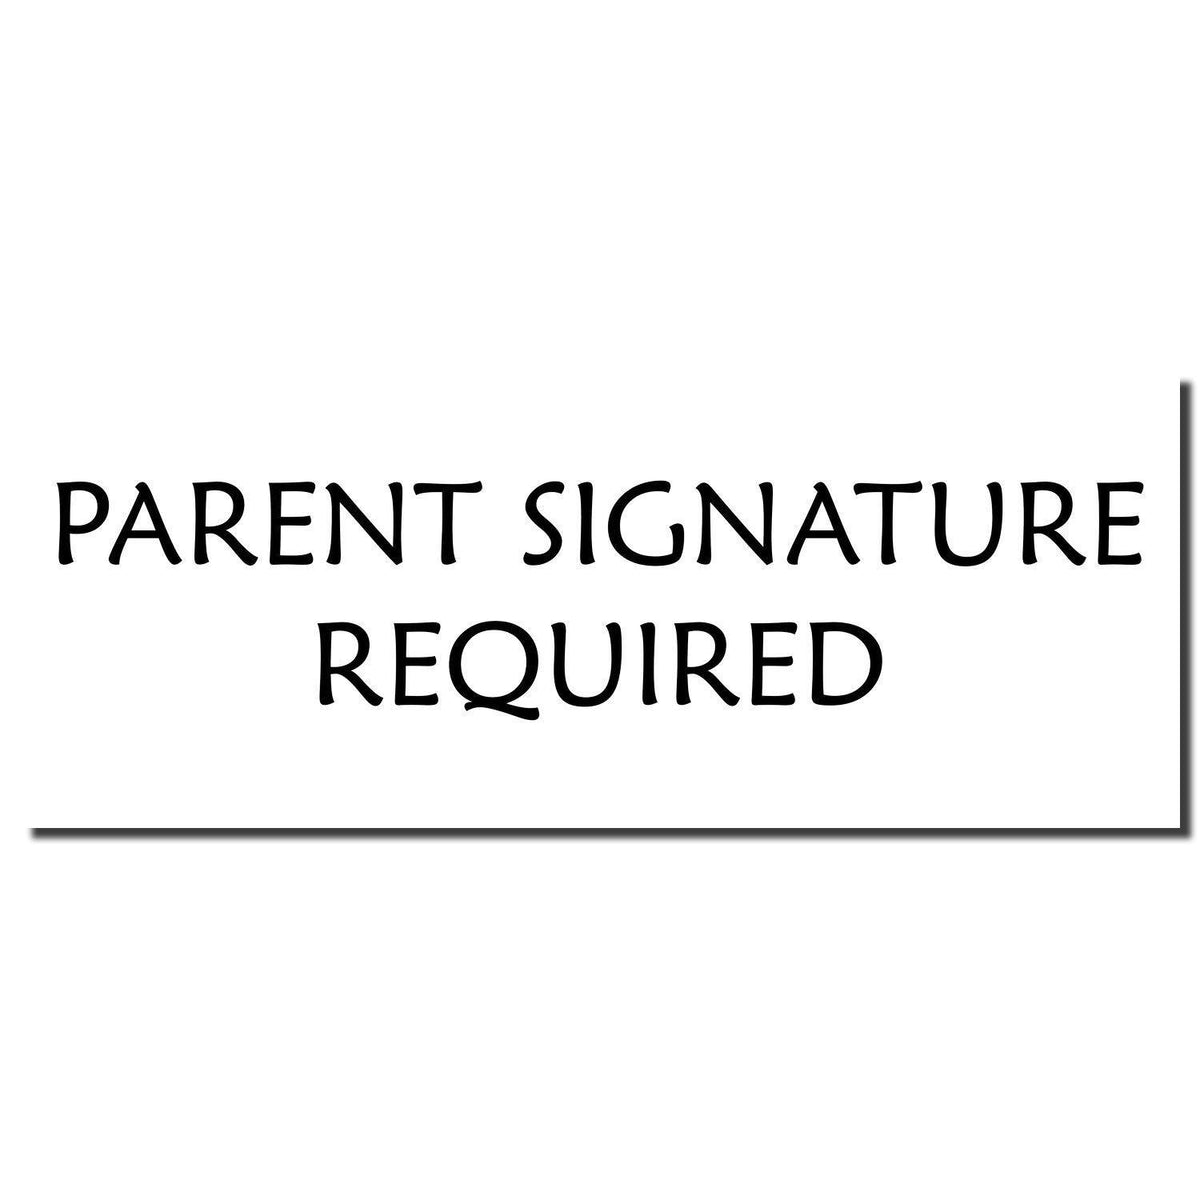 Enlarged Imprint Large Pre Inked Parent Signature Required Stamp Sample